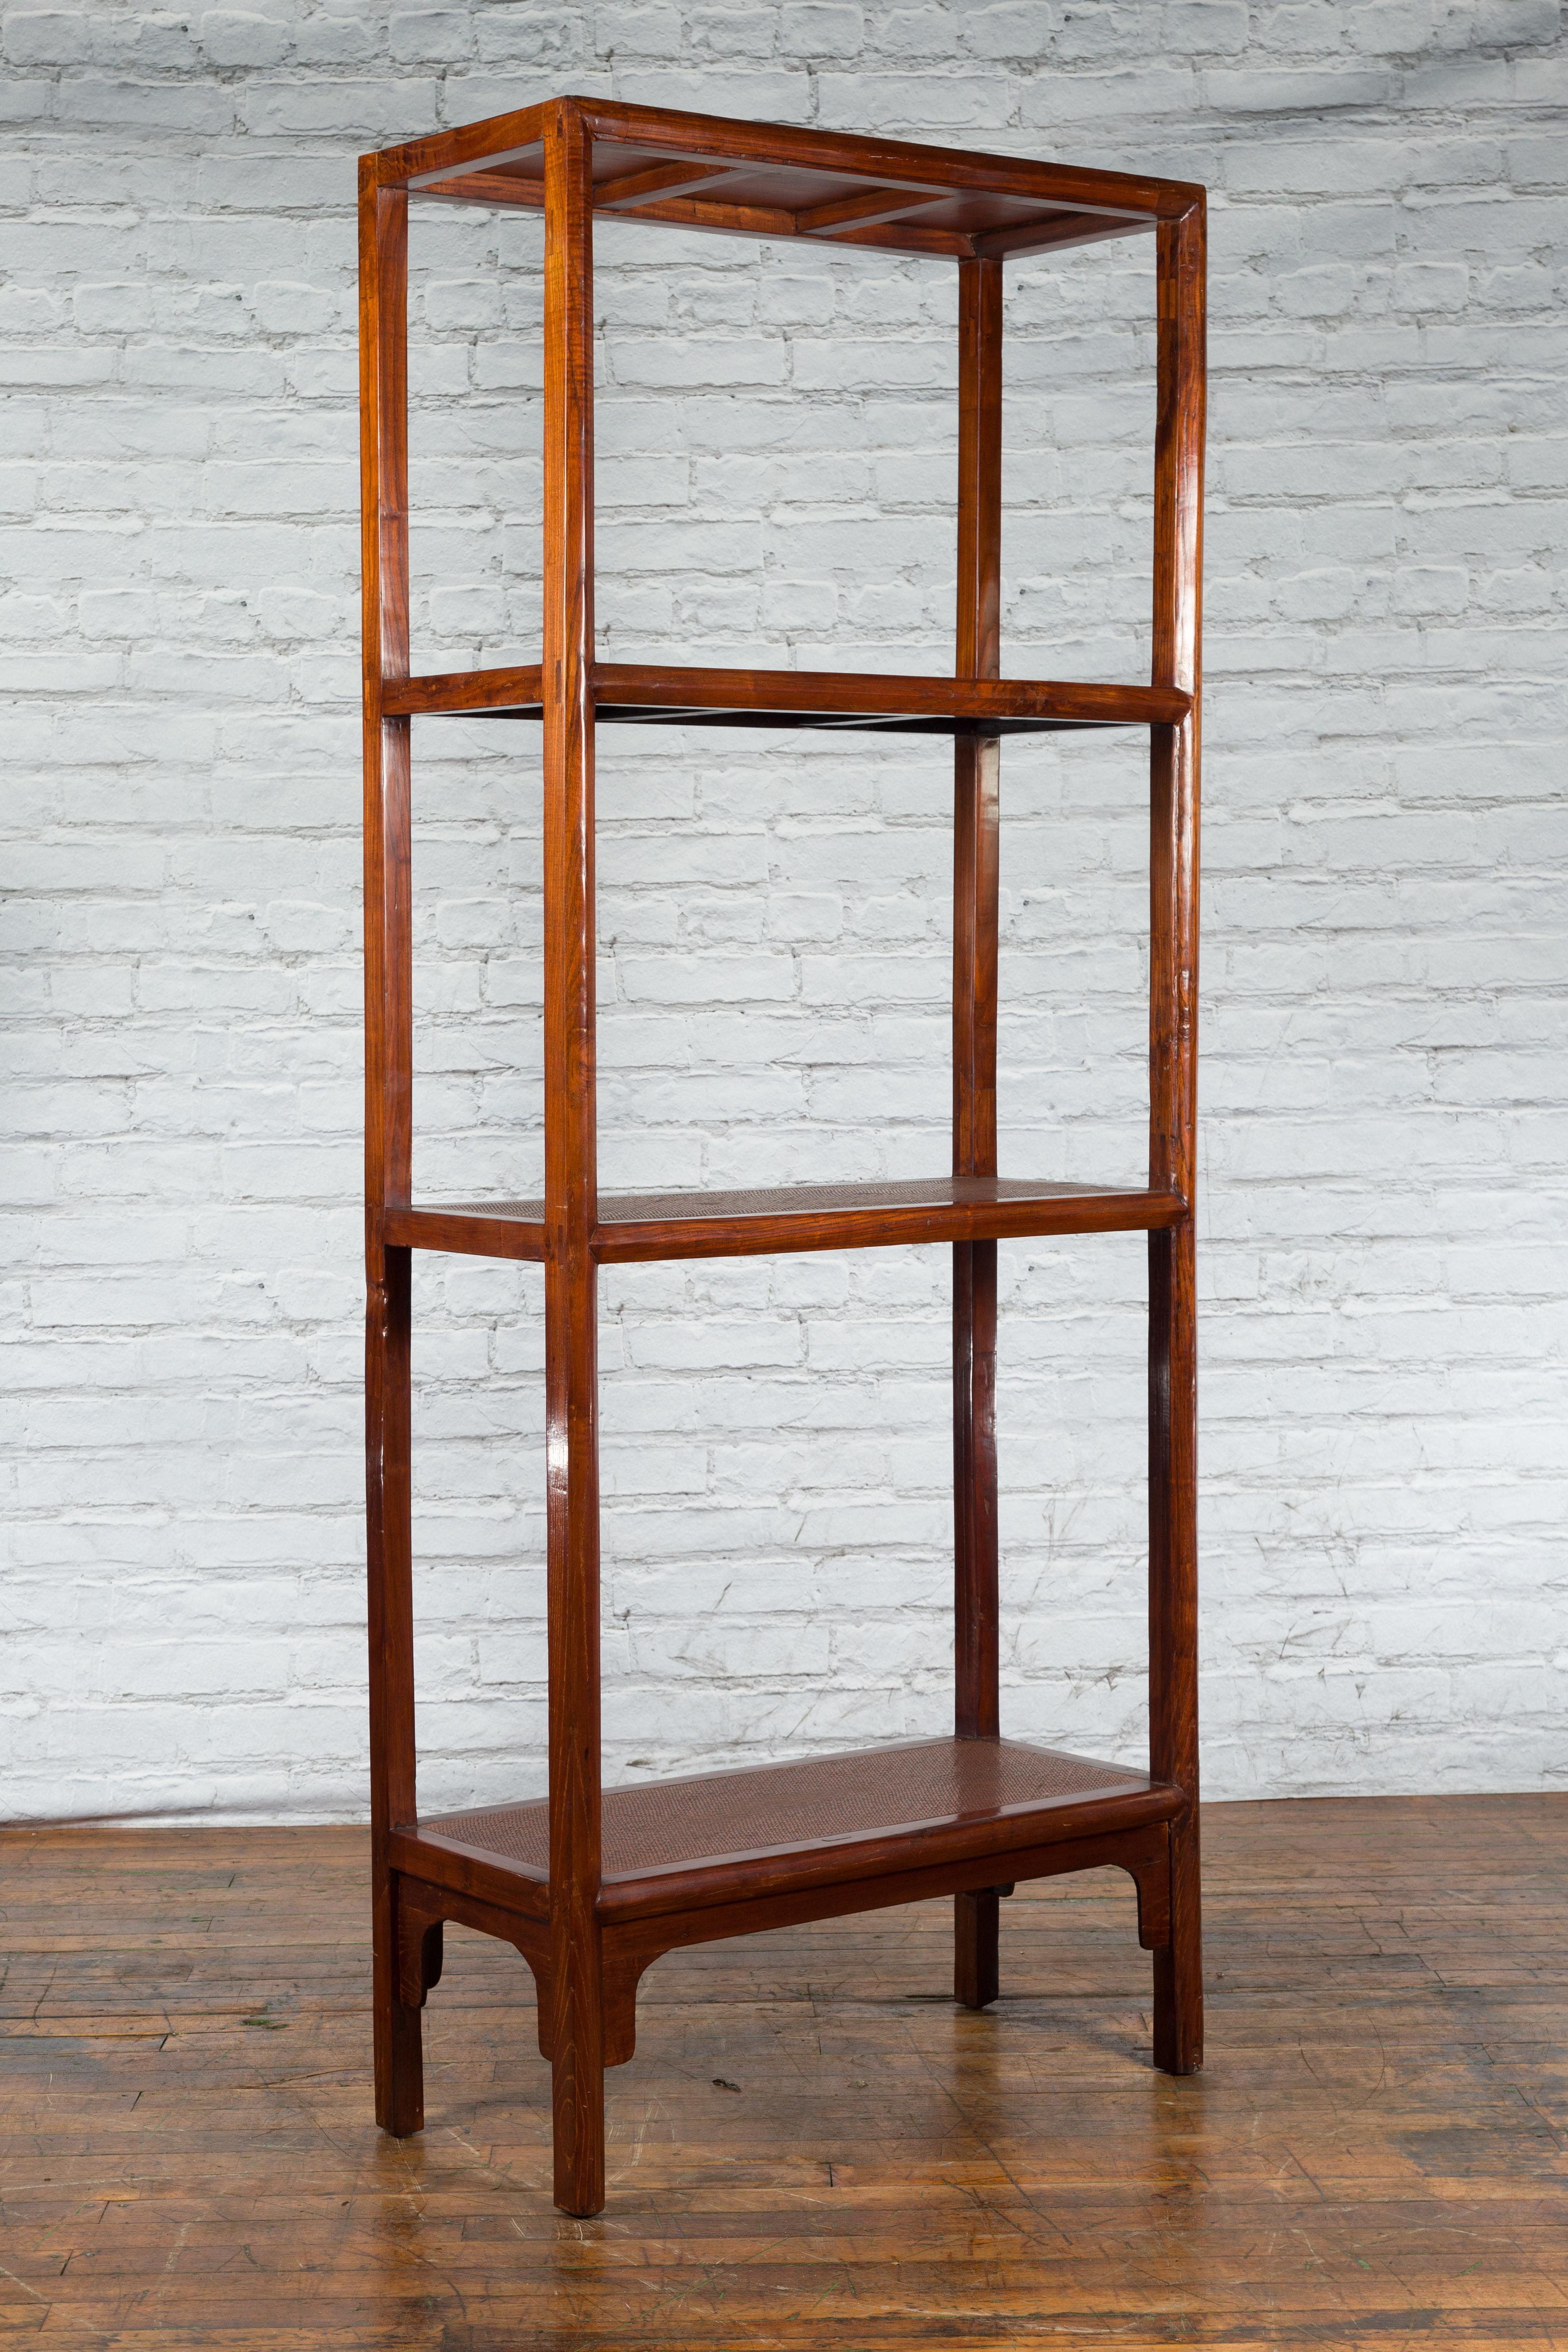 Chinese Early 20th Century Wooden Bookcase with Woven Rattan Shelves and Apron For Sale 3